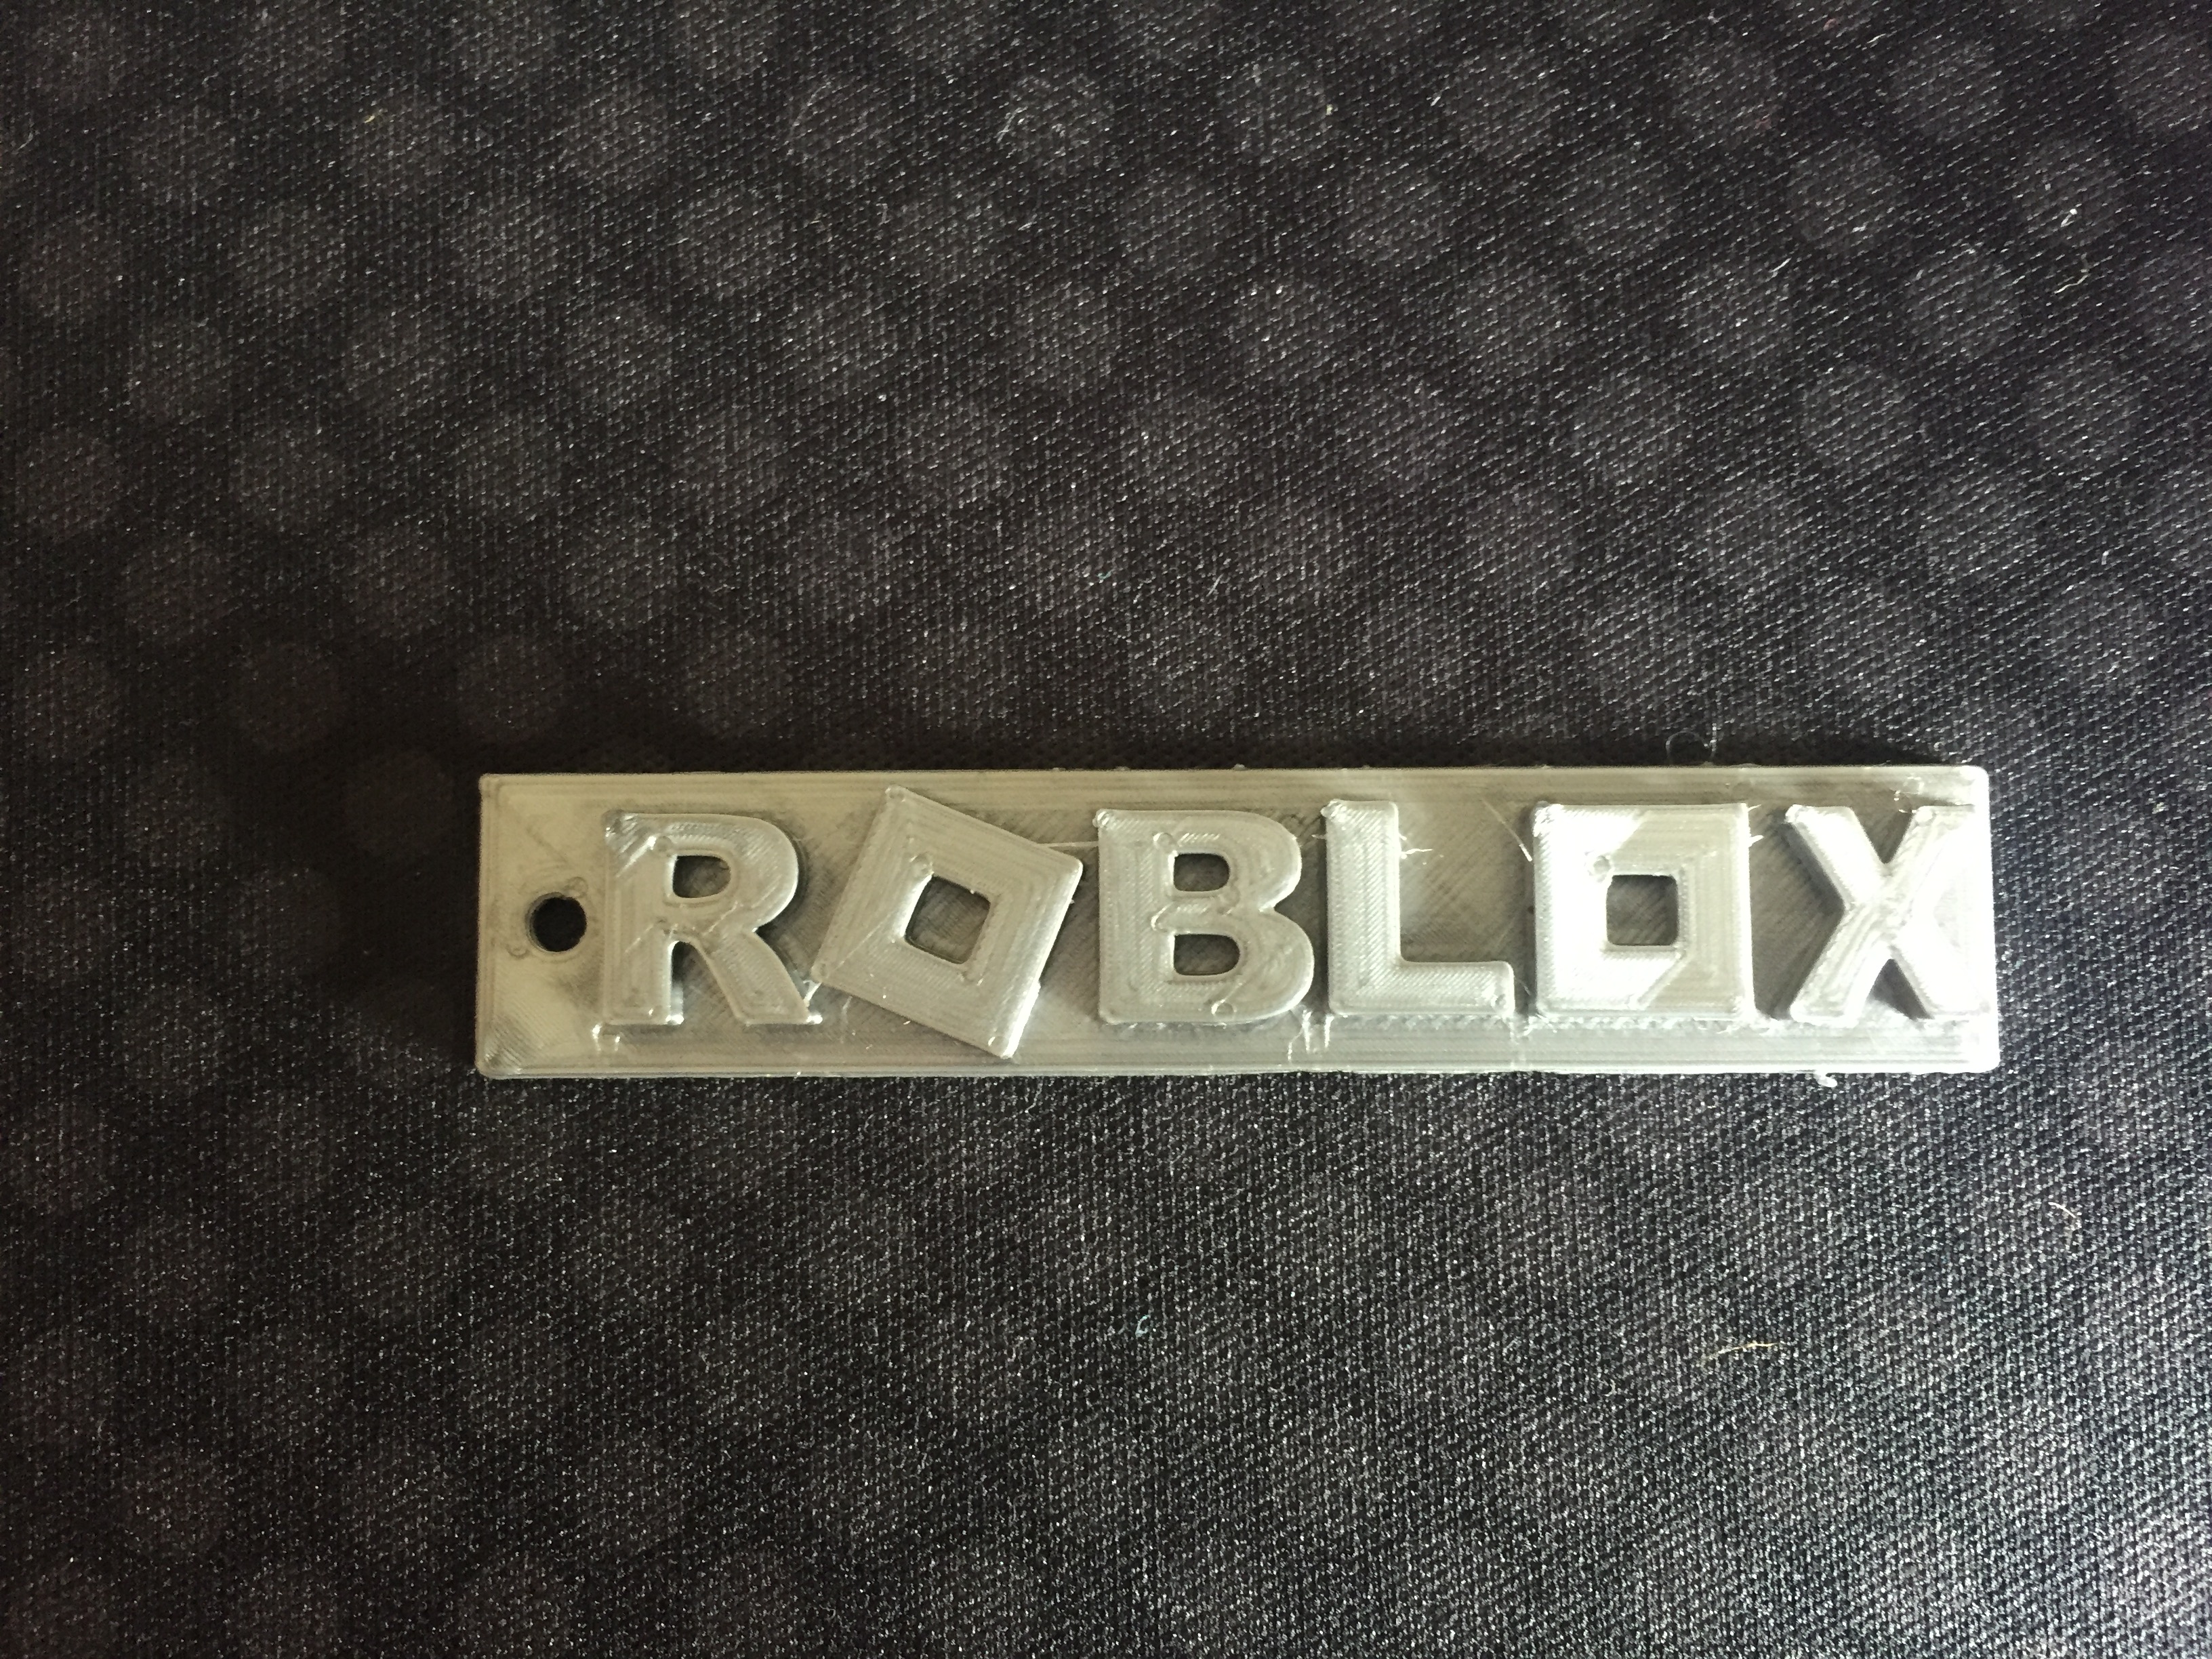 Makes Of Roblox Keychain By Bfpnascimento Thingiverse - roblox keychain